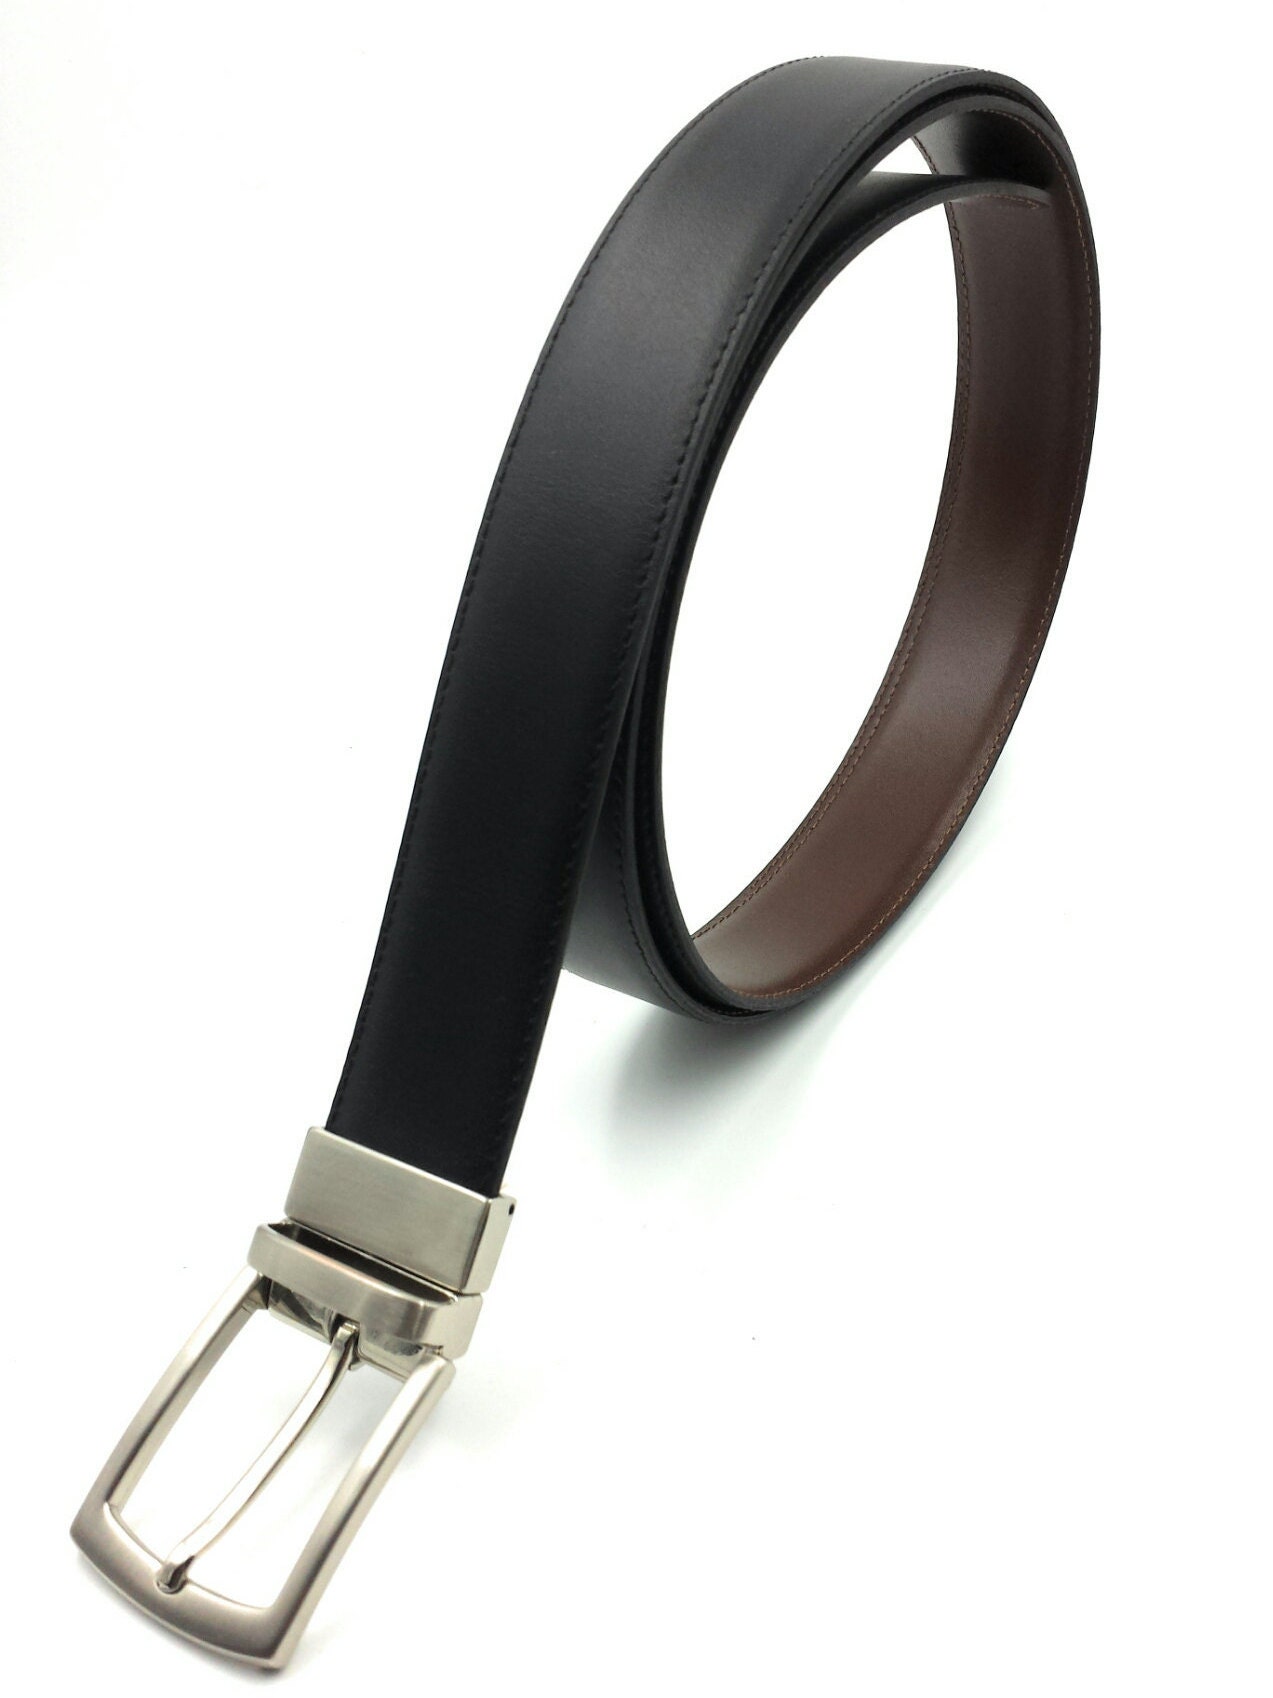 Reversible leather belts made in France